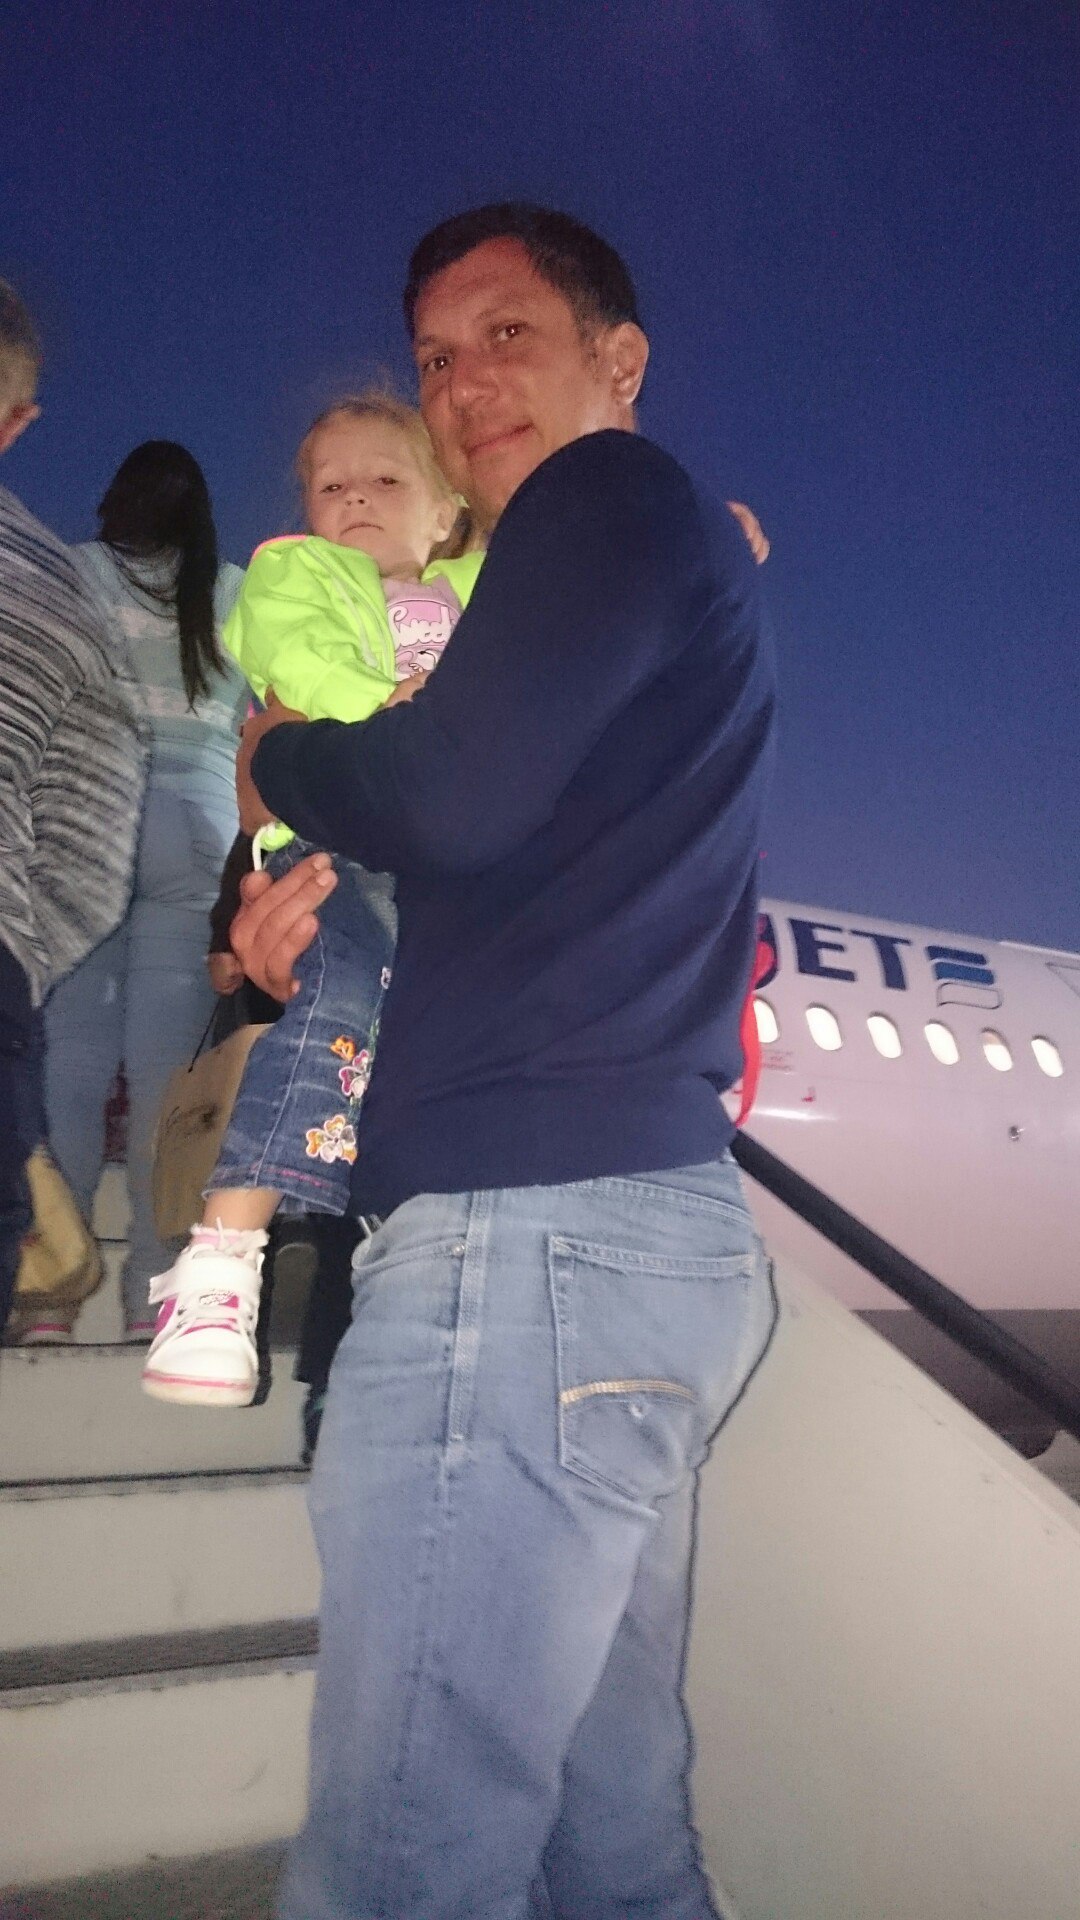 Mother posted picture of husband and daughter boarding Russian flight #7K9268, which crashed on 10/31/15 (caption read “We’re going home.”)